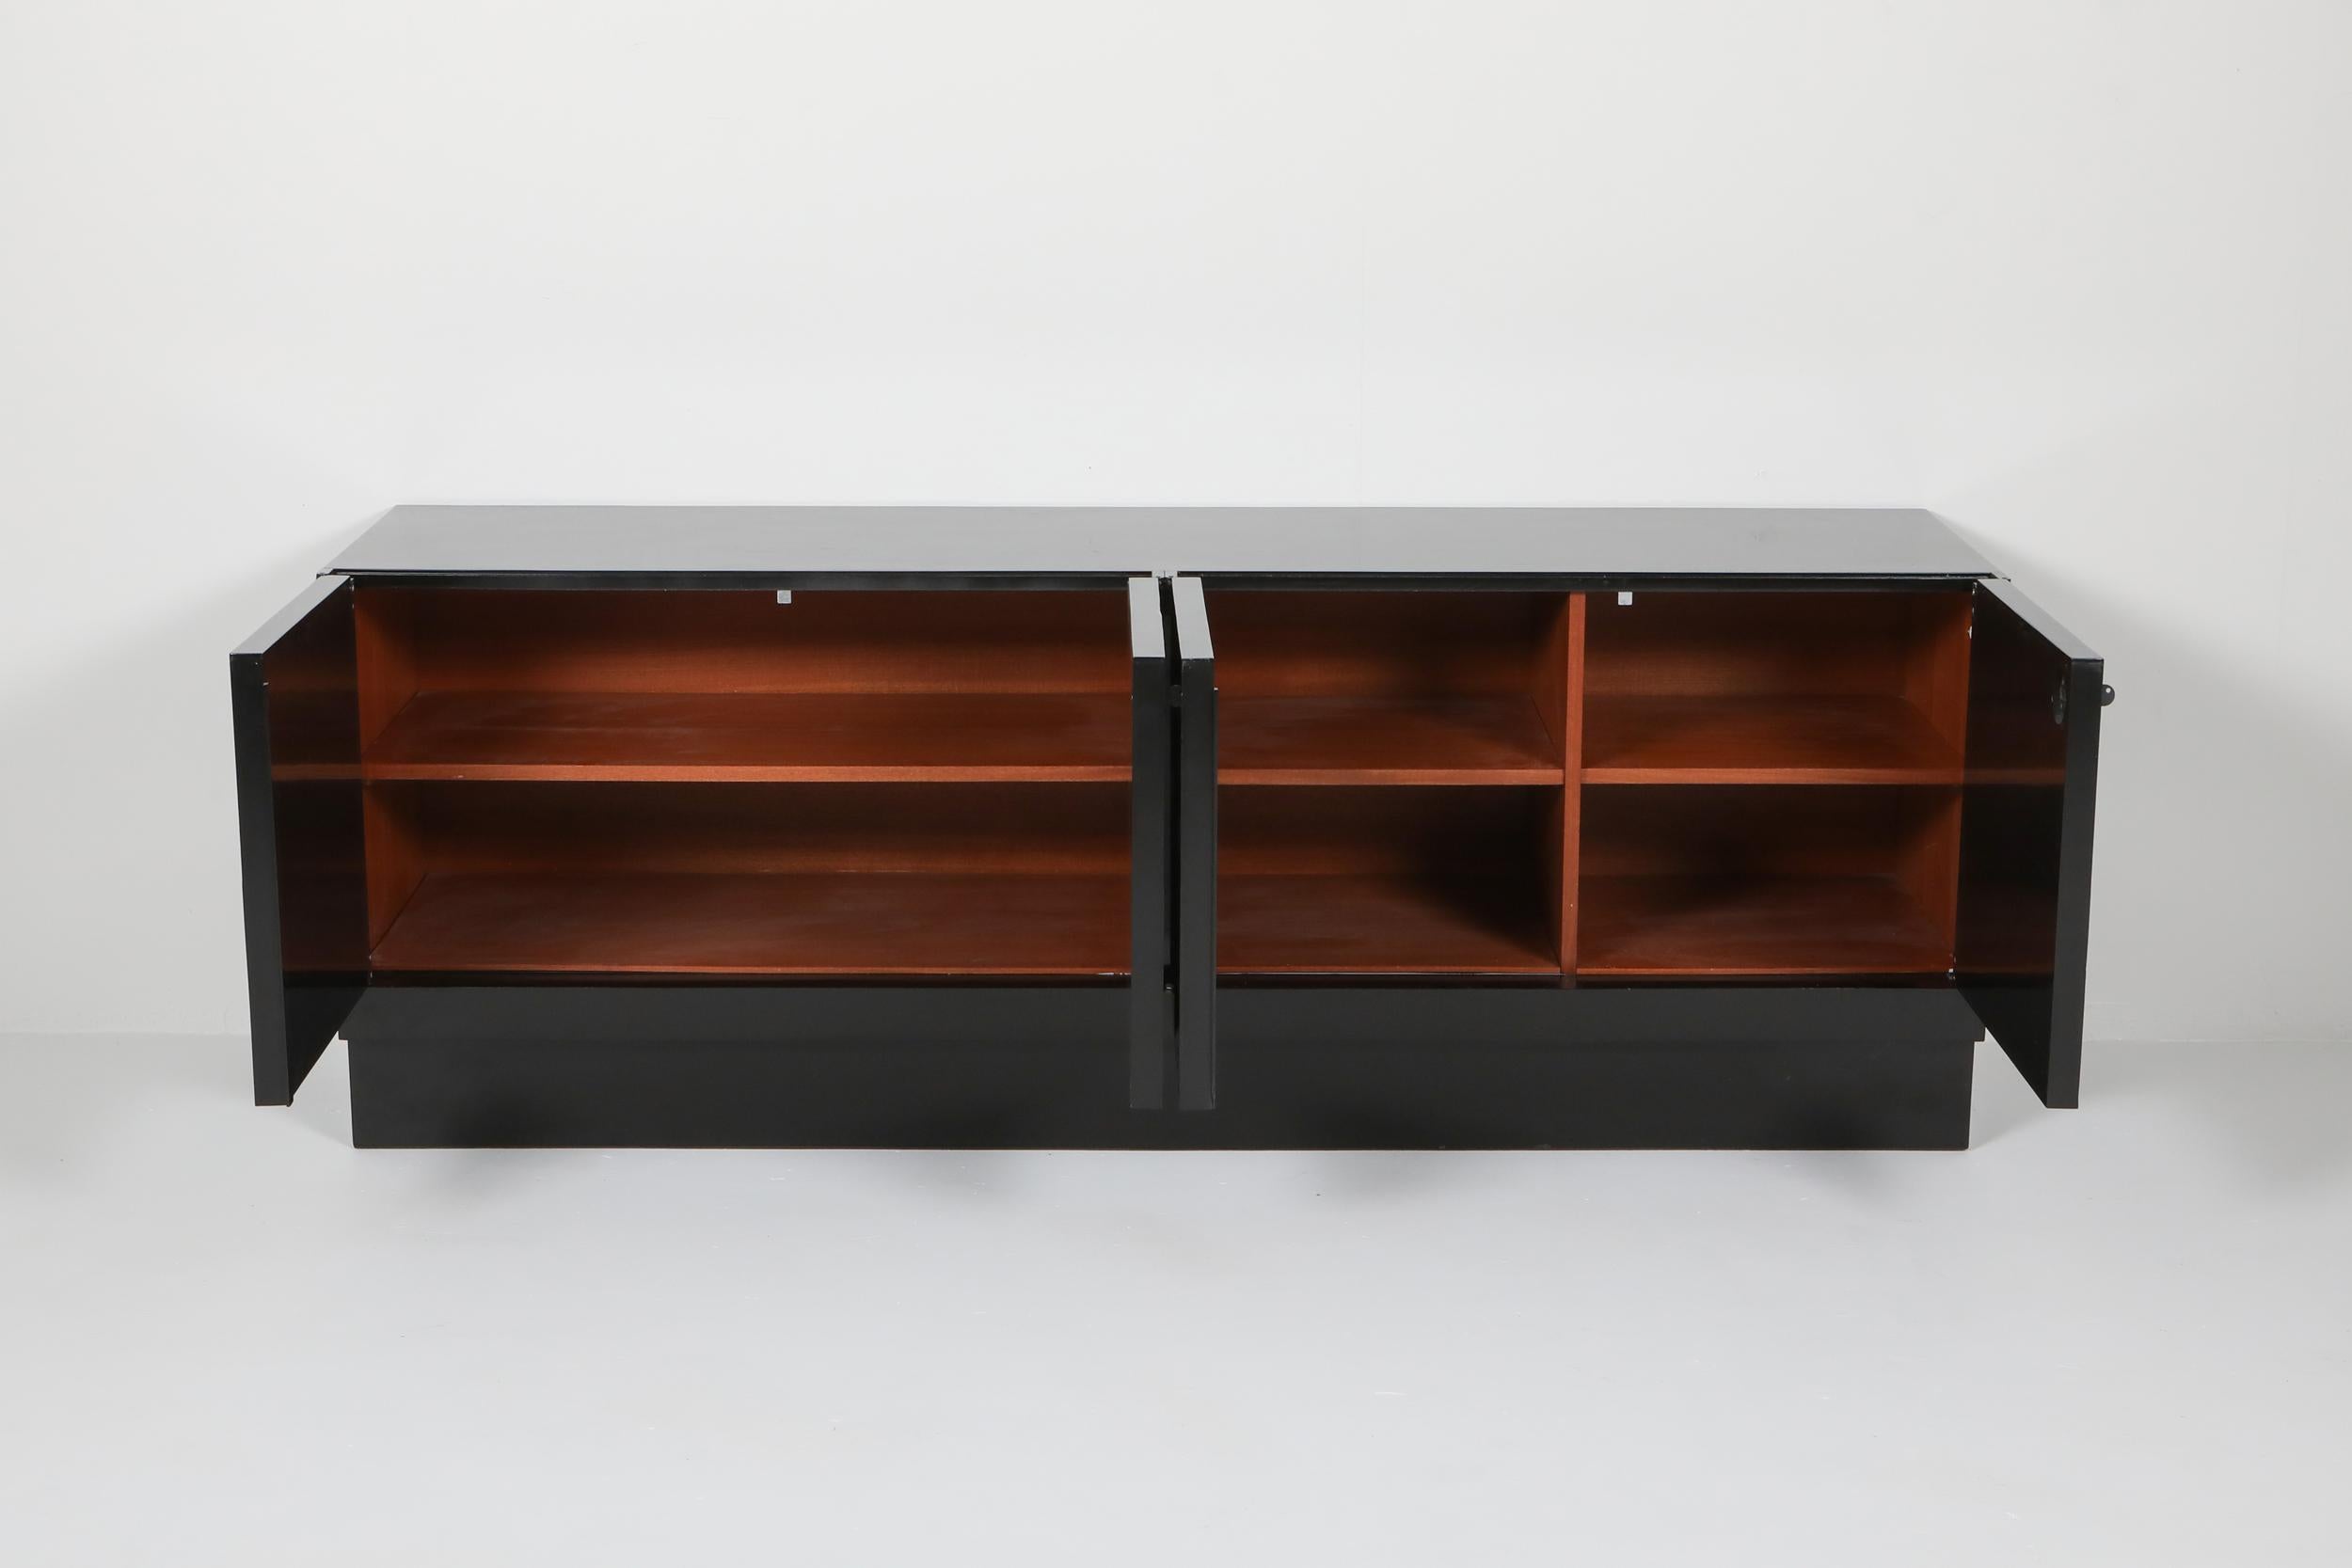 Diamond stained oak Brutalist credenza, De Coene Belgium, 1970s

Unusual model as this is glossy lacquered and rests on a solid base.
Equipped with four door panels that show high quality woodwork with beautiful graphic shaped patterns.